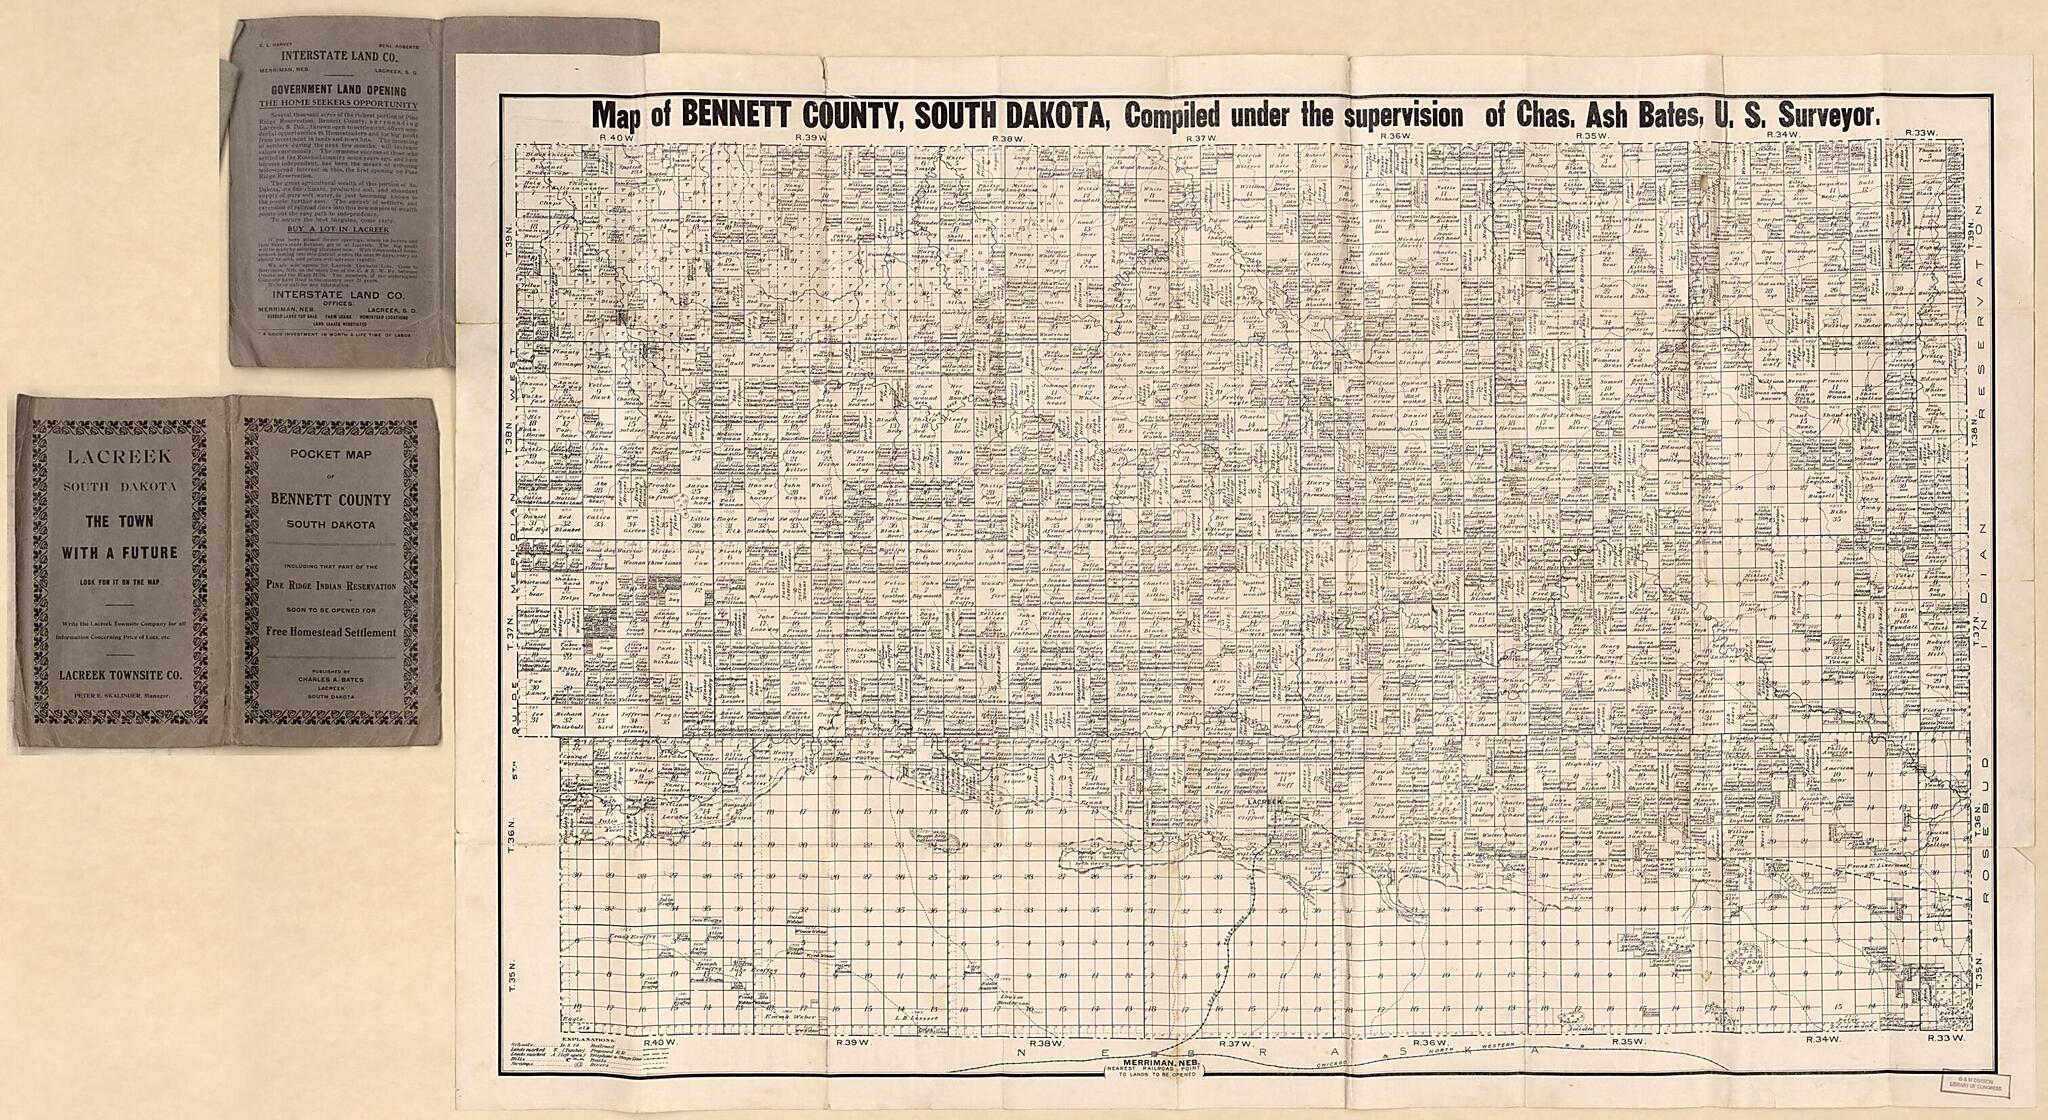 This old map of Map of Bennett County, South Dakota (Pocket Map of Bennett County, South Dakota, Including That Part of the Pine Ridge Indian Reservation Soon to Be Opened for Free Homestead Settlement) from 1910 was created by Charles A. (Charles Ash) B